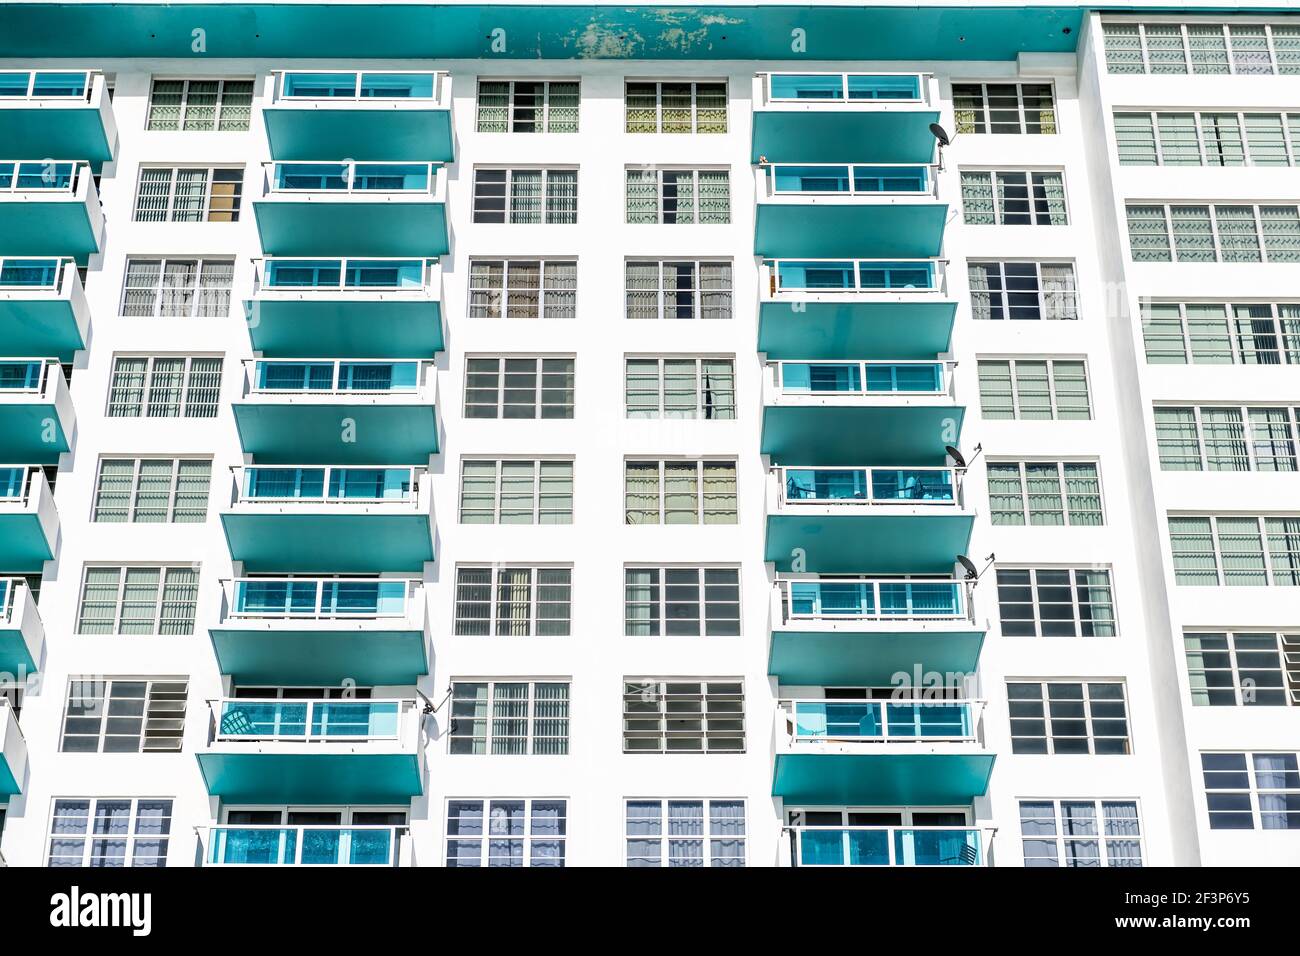 Abstract minimalist minimalism exterior architecture facade of art deco white turquoise teal colorful vintage retro residential building hotel with ba Stock Photo